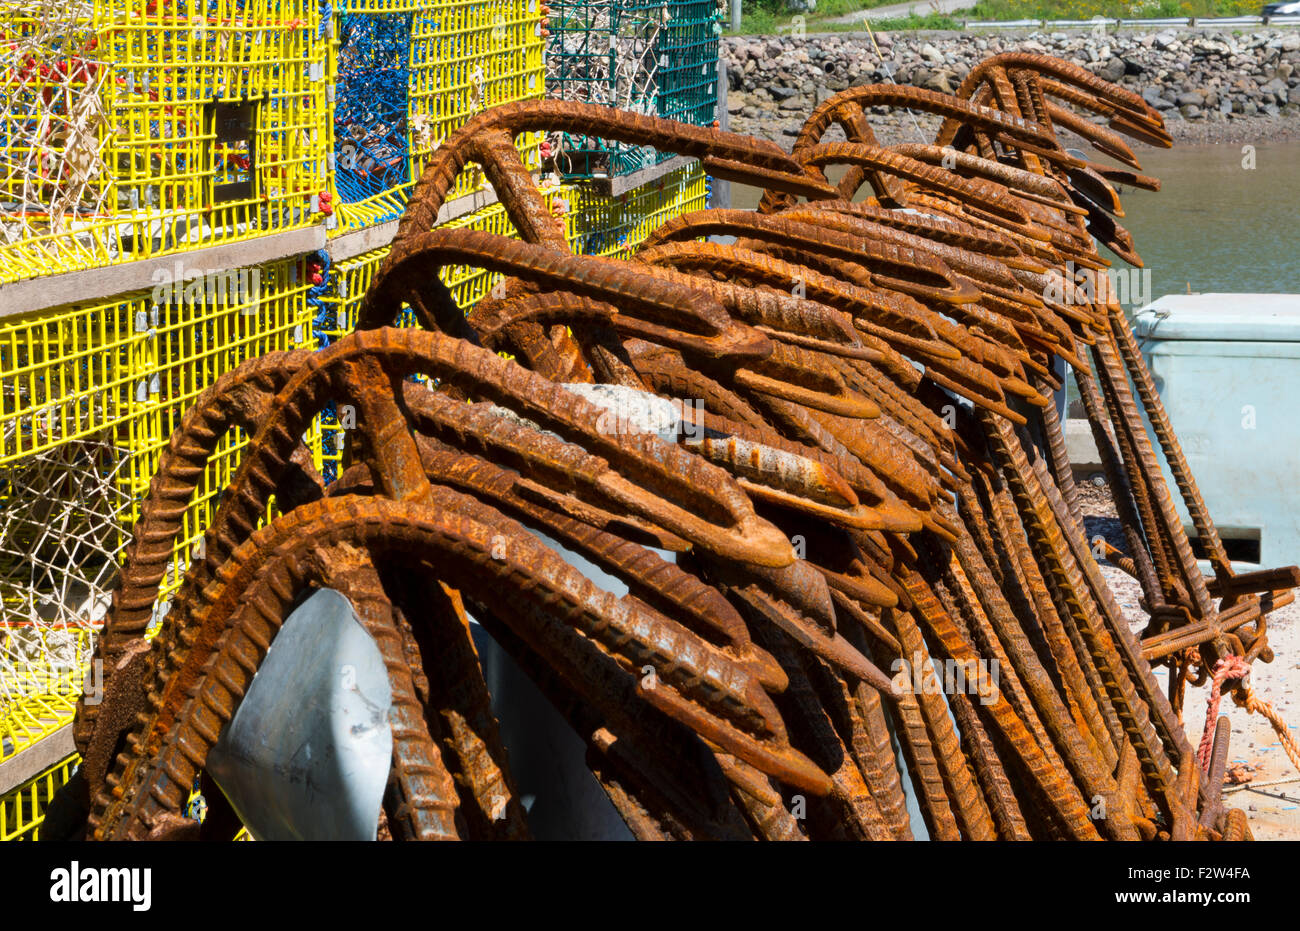 Canada St Martins New Brunswick close up of boat anchors in small fishing village for trapping lobsters and fishing Stock Photo